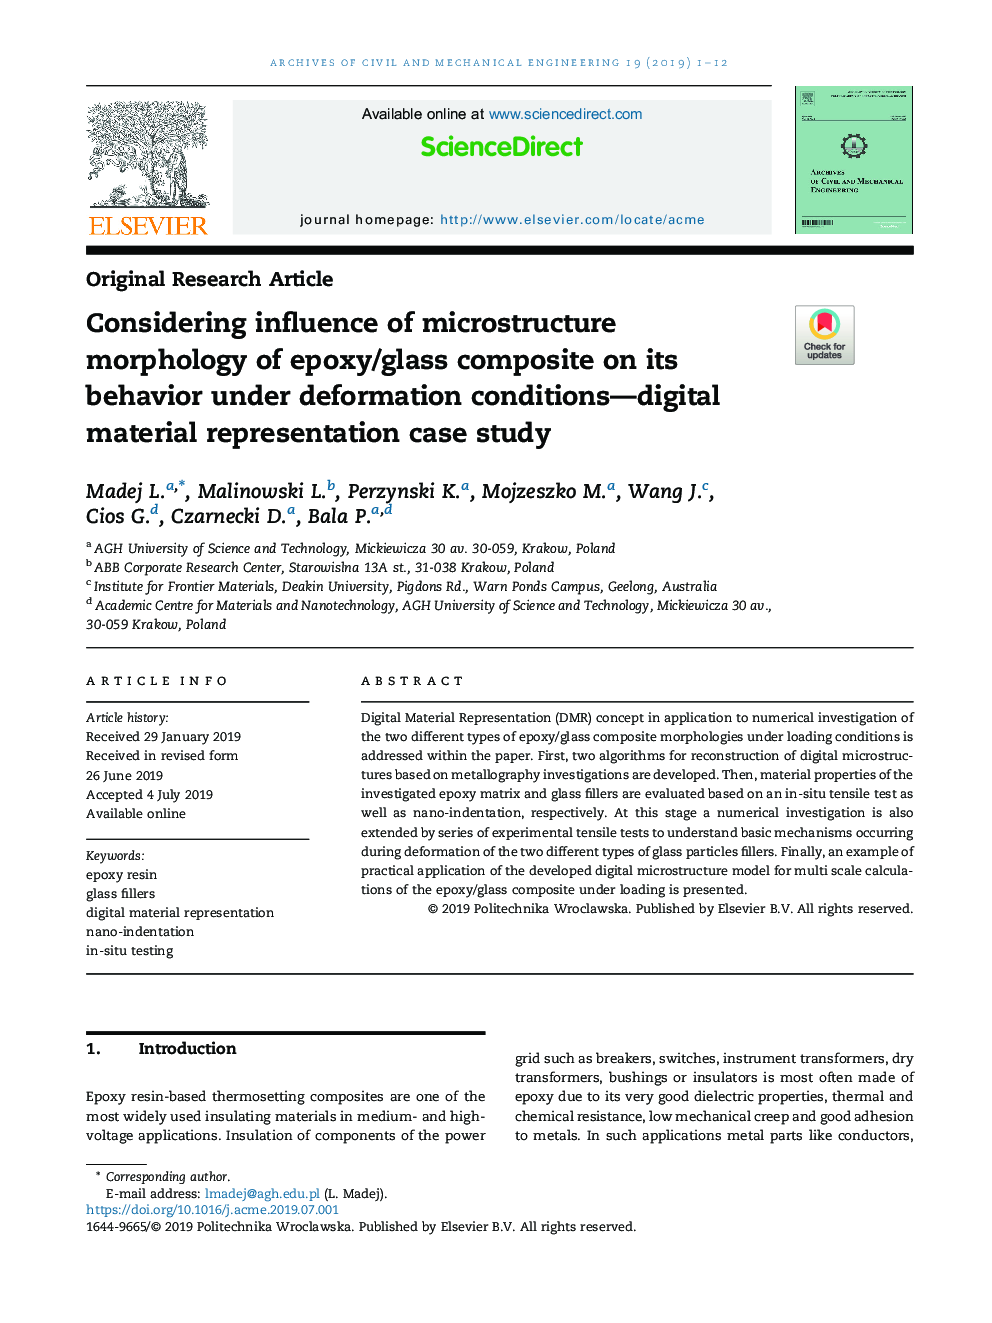 Considering influence of microstructure morphology of epoxy/glass composite on its behavior under deformation conditions-digital material representation case study